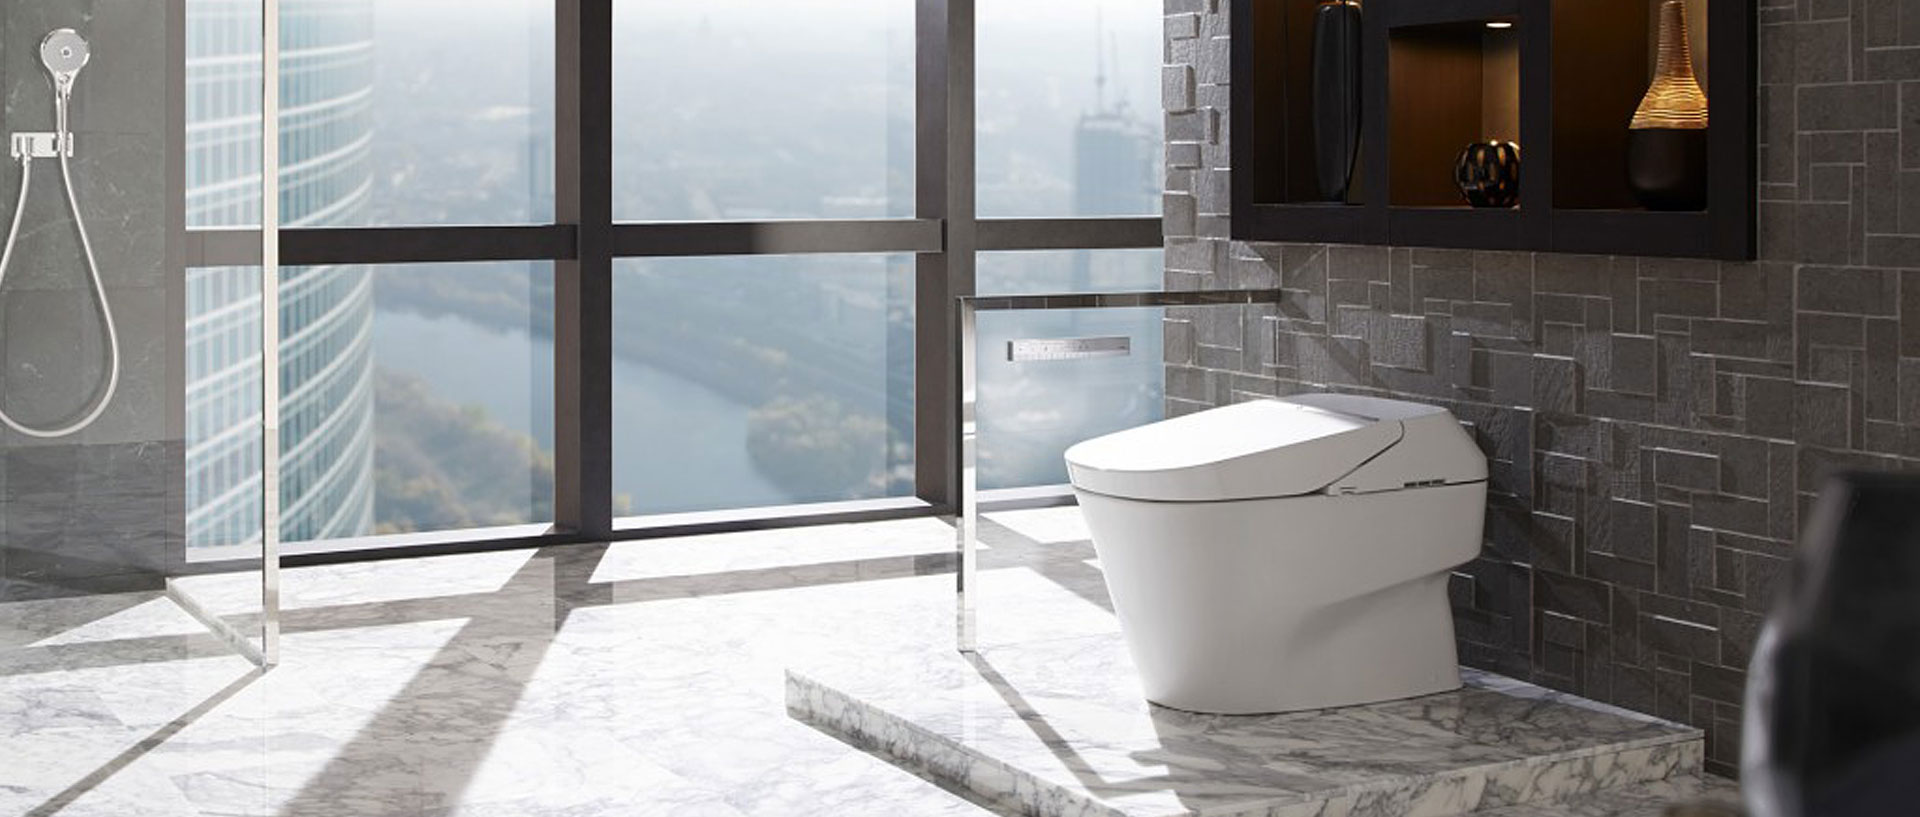 Reasons behind the Higher Prices of Geberit & Toto Smart Toilets